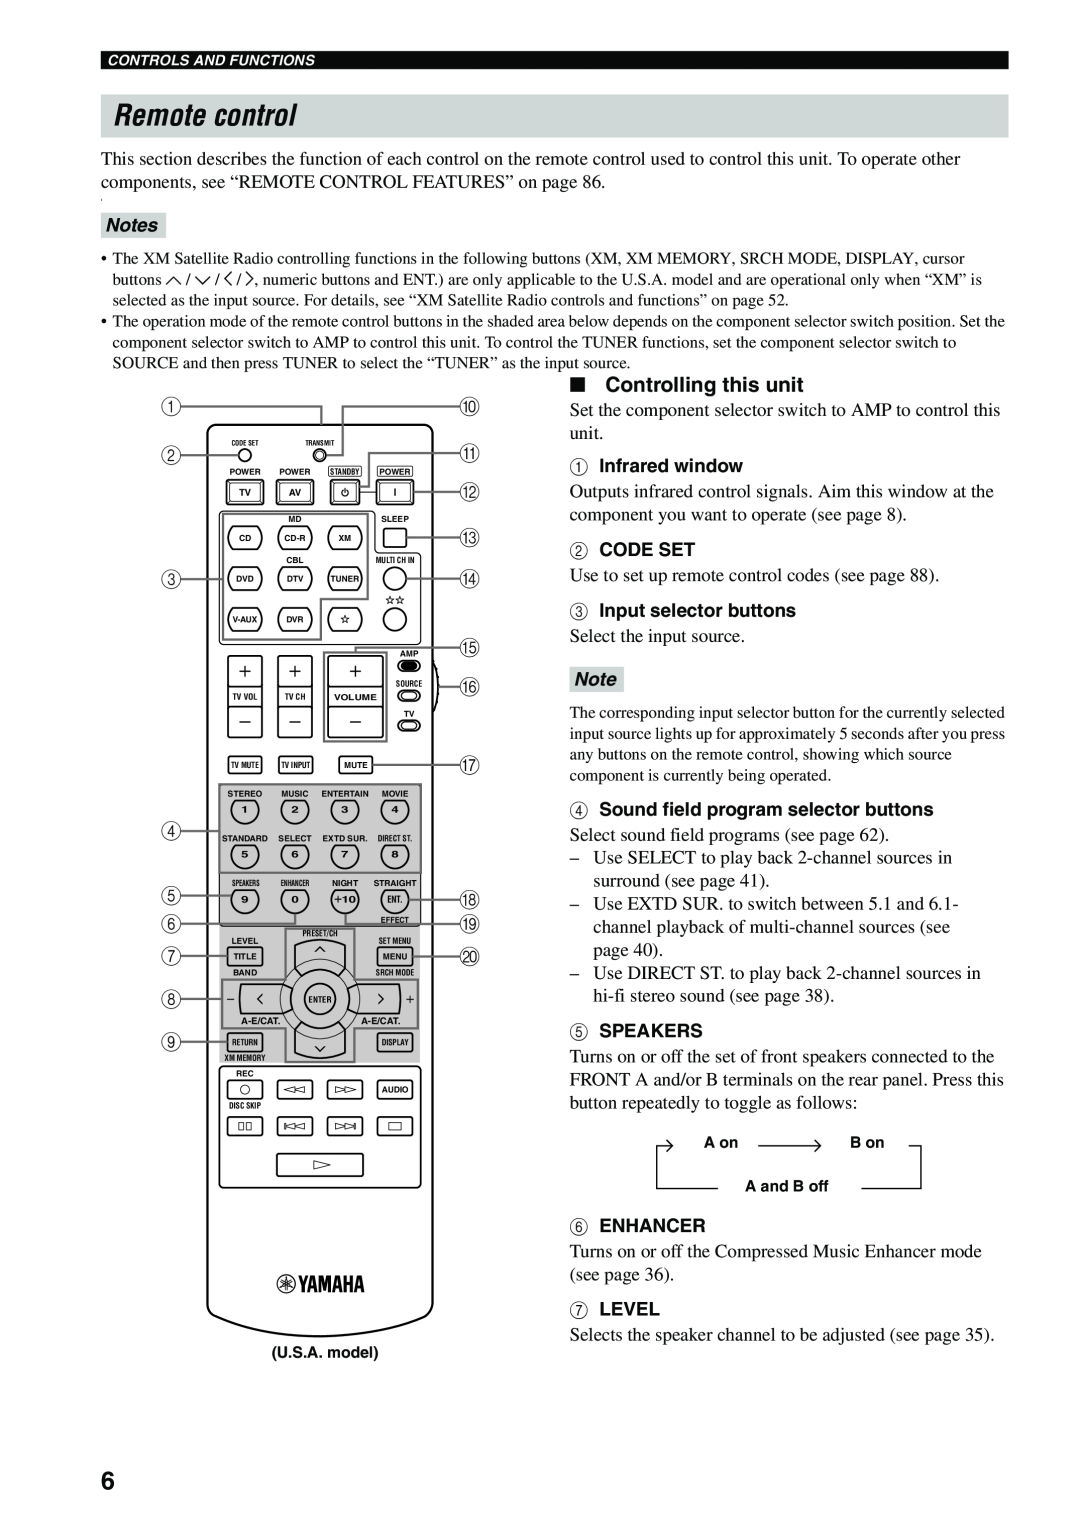 Yamaha HTR-5940 owner manual Remote control, Controlling this unit 